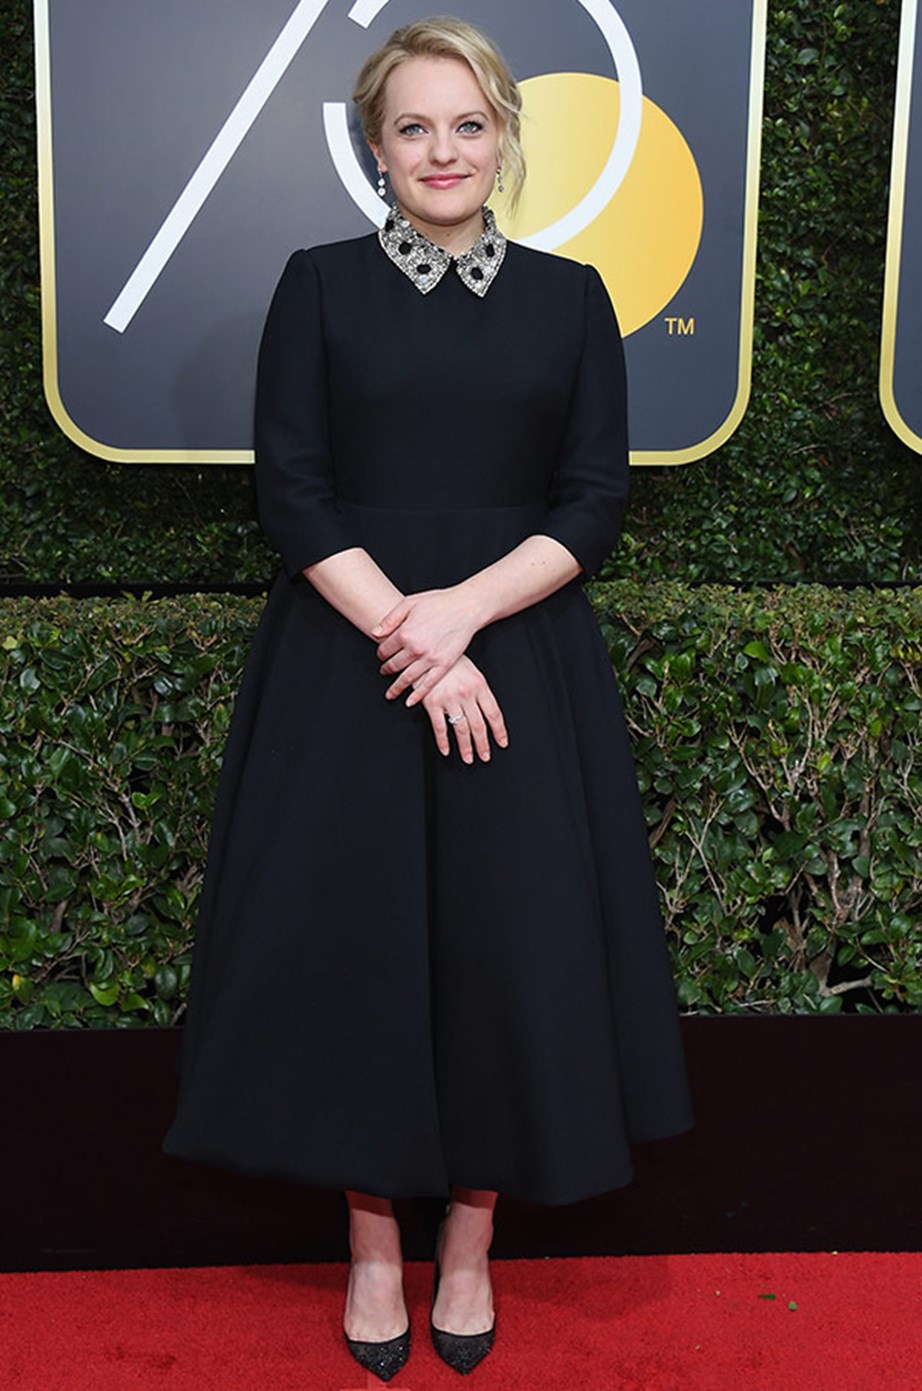 Elizabeth Moss, who is nominated for an award for her role in A Handmaid's Tale.